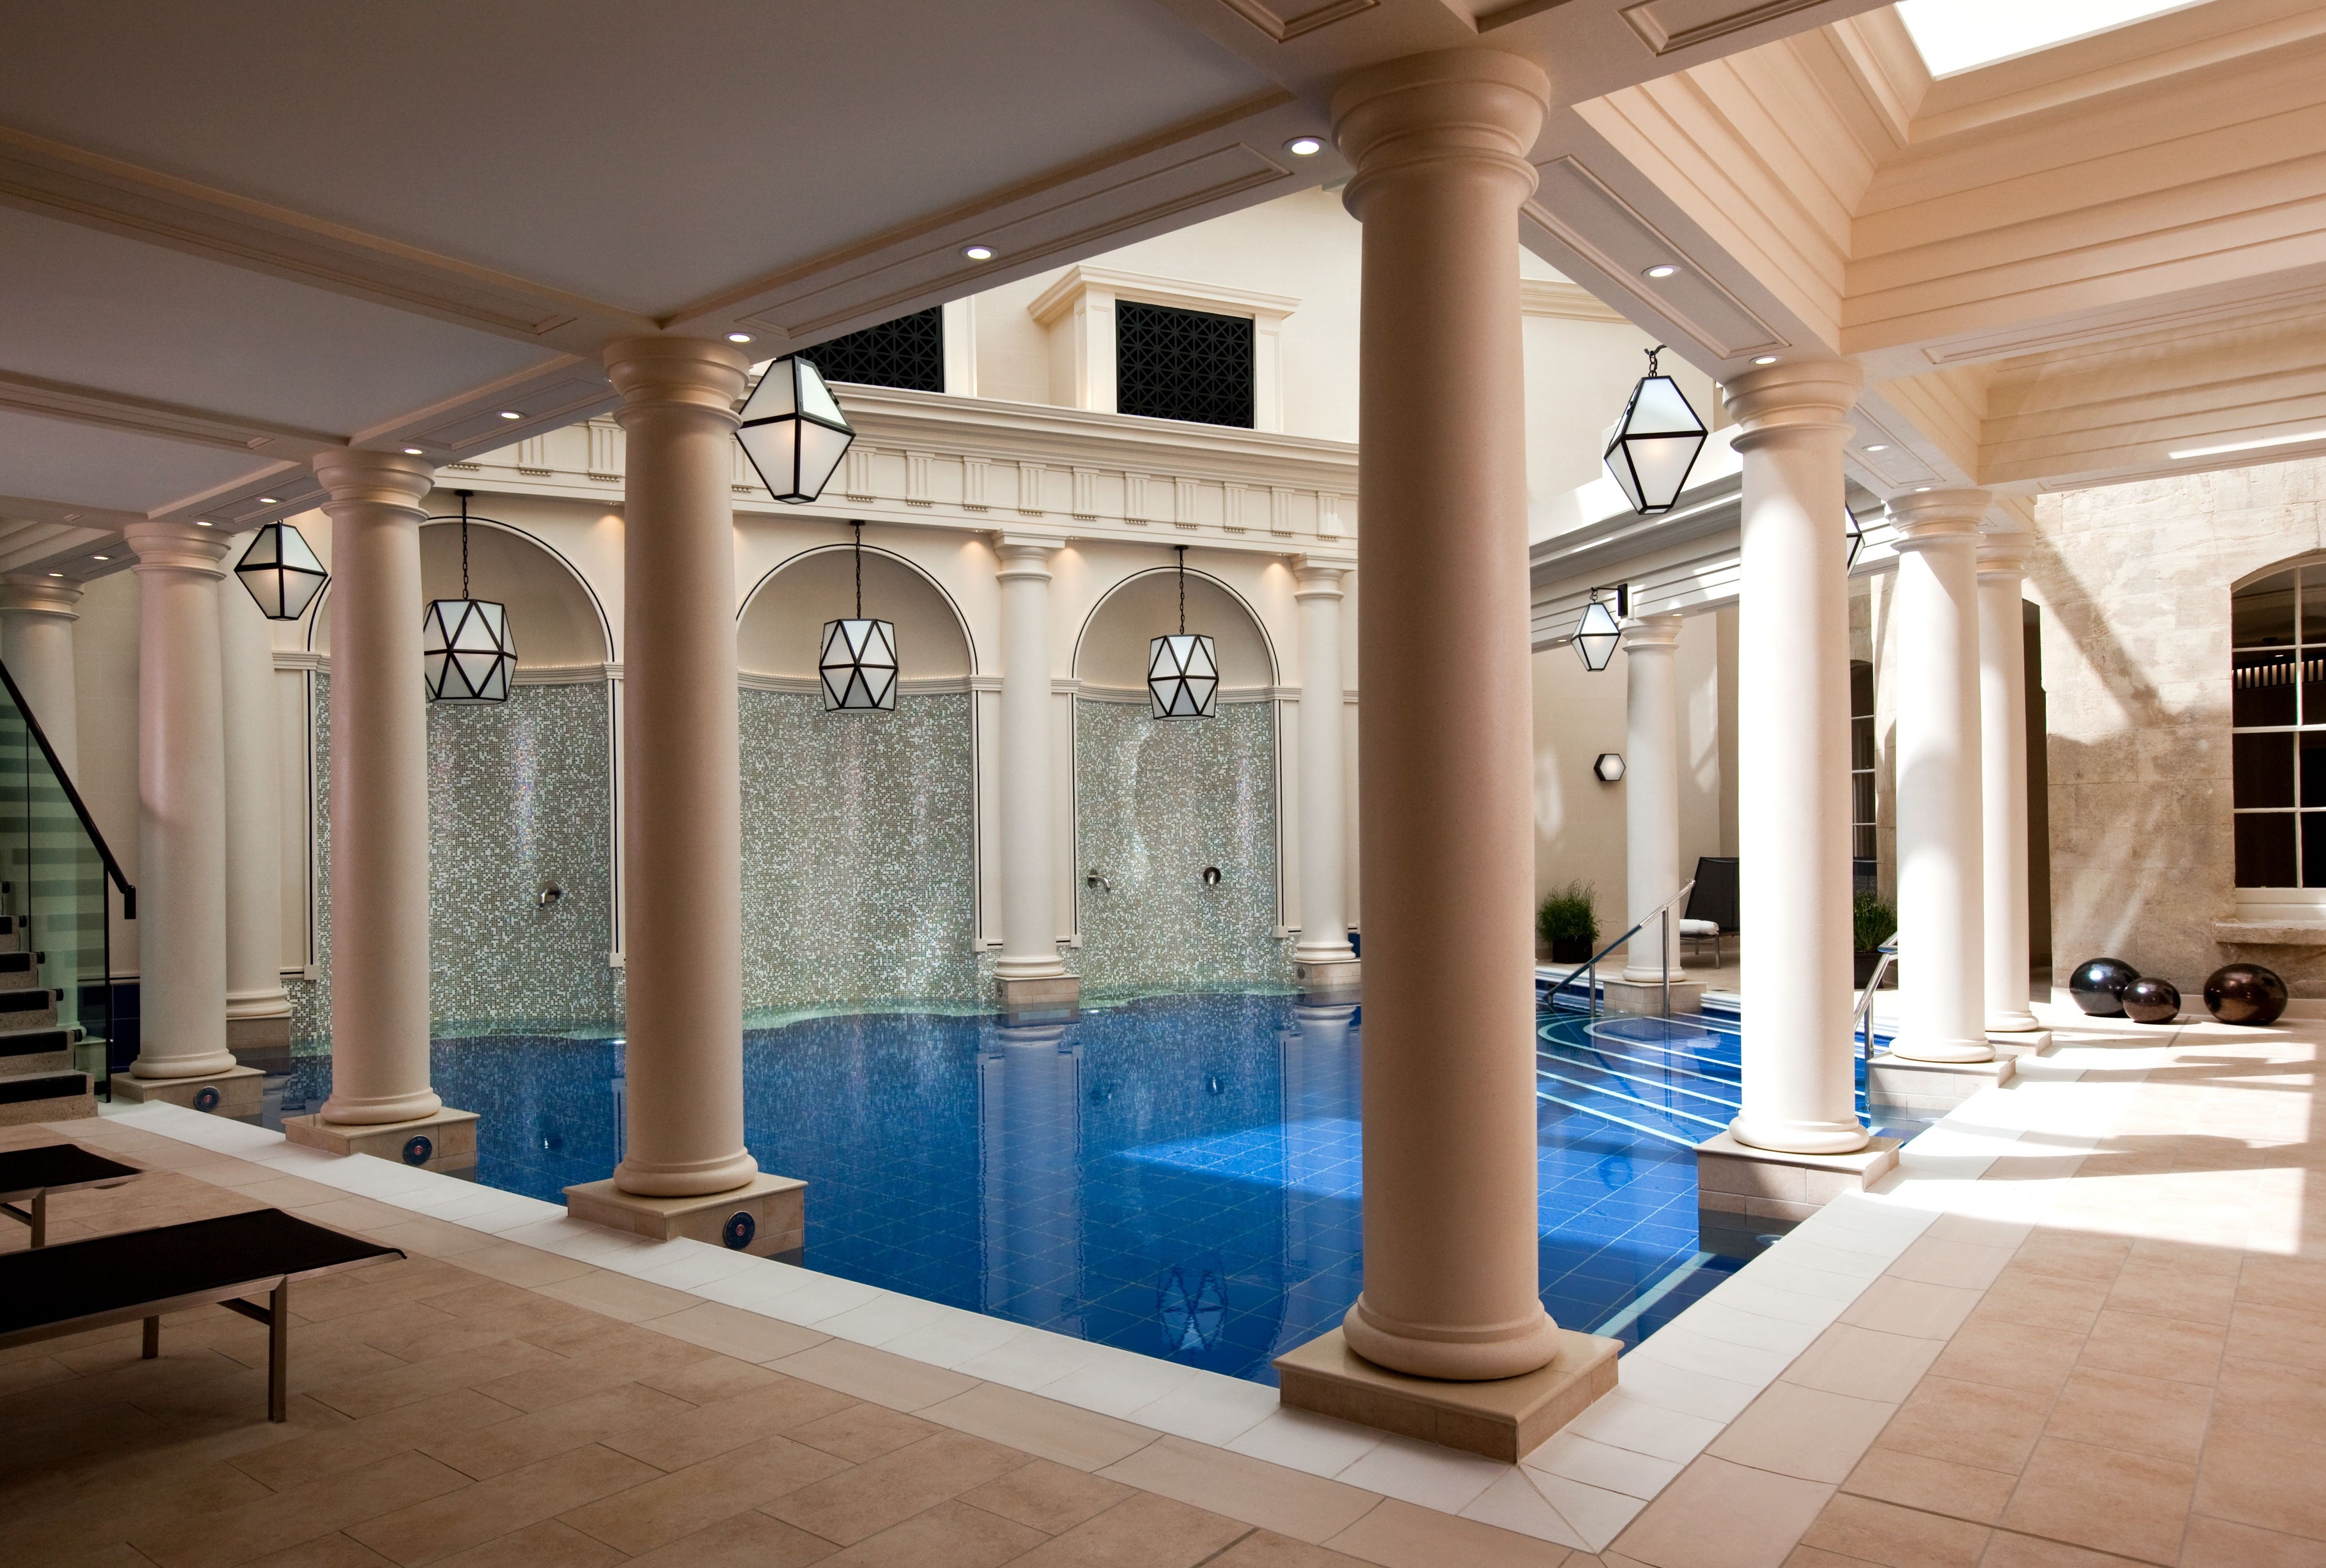 The Roman and Georgian inspiration is visable in The Gainsborough Bath Spa